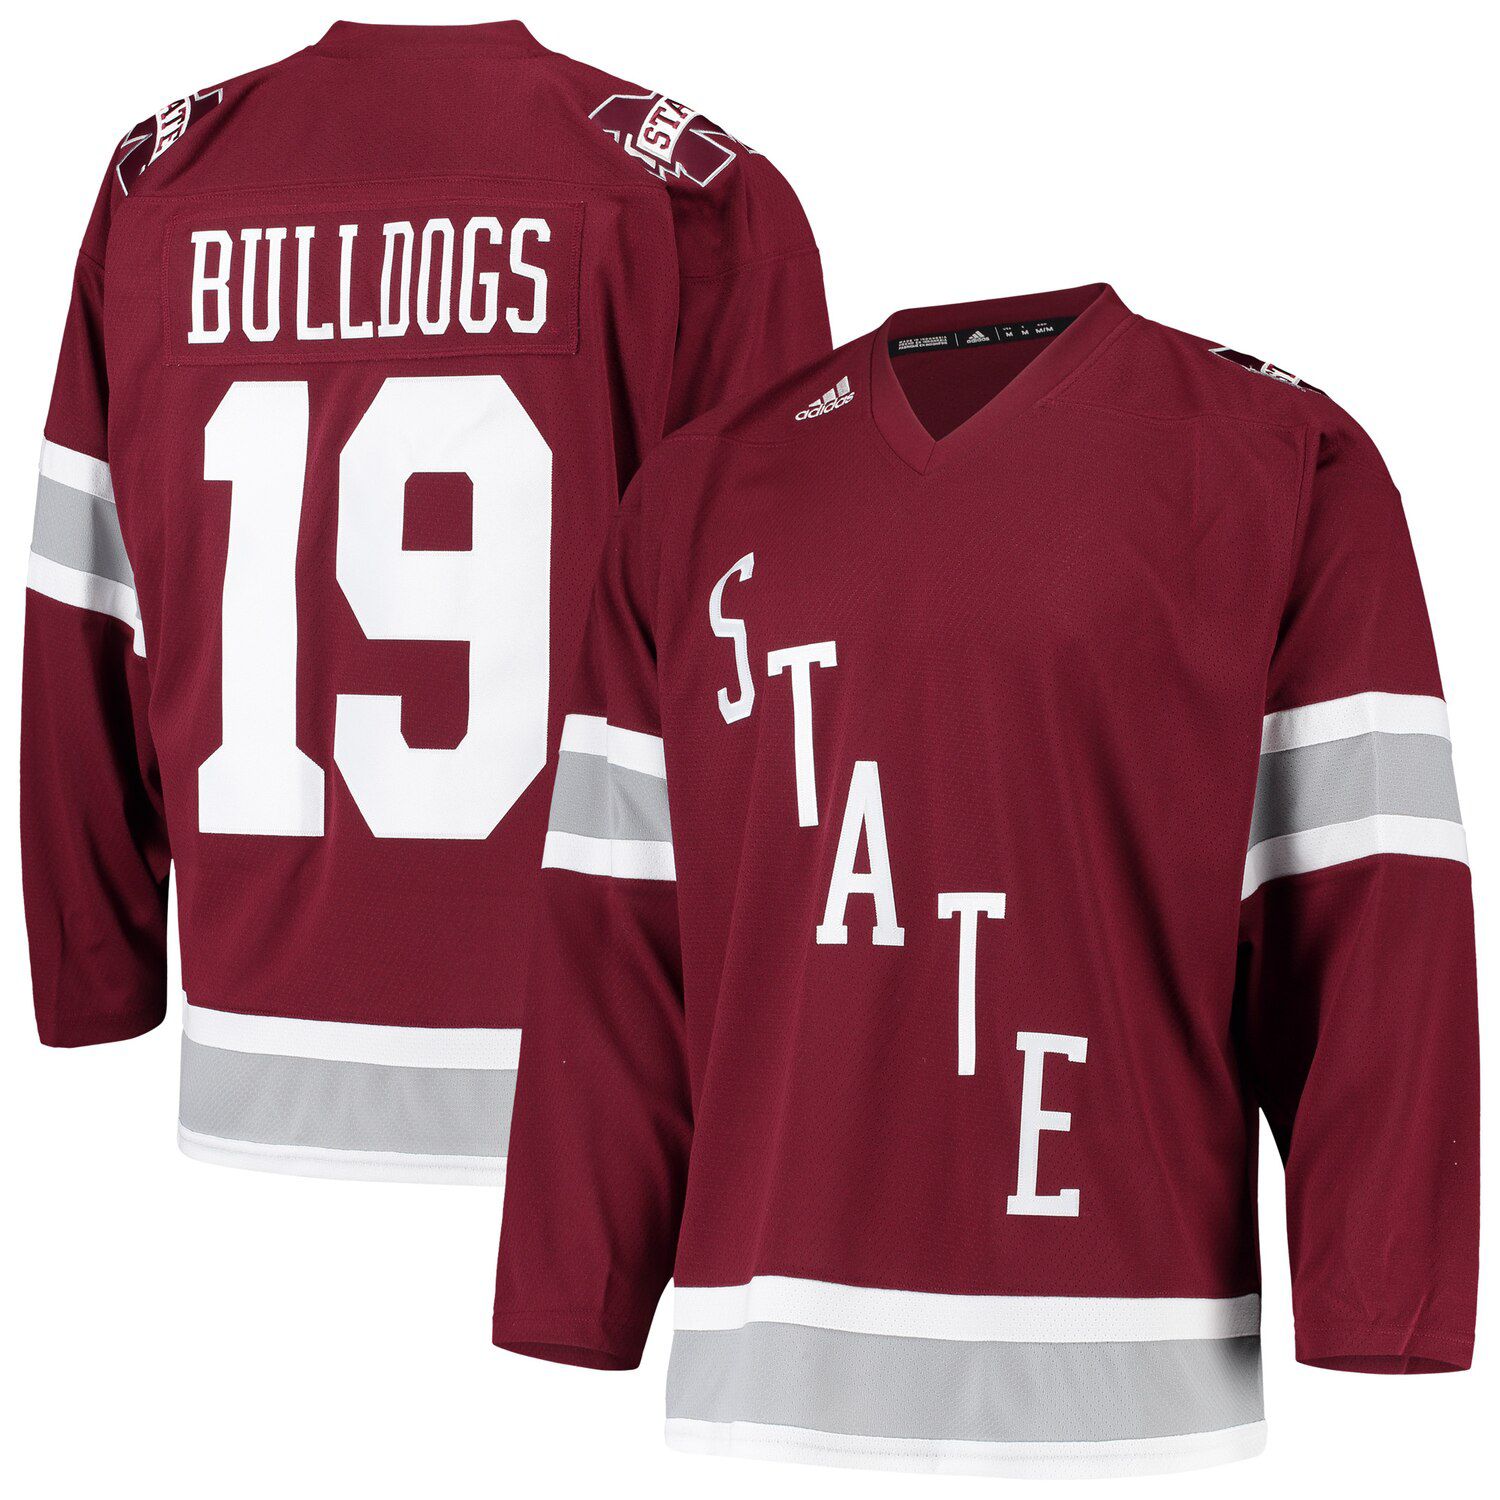 mississippi state bulldogs jersey